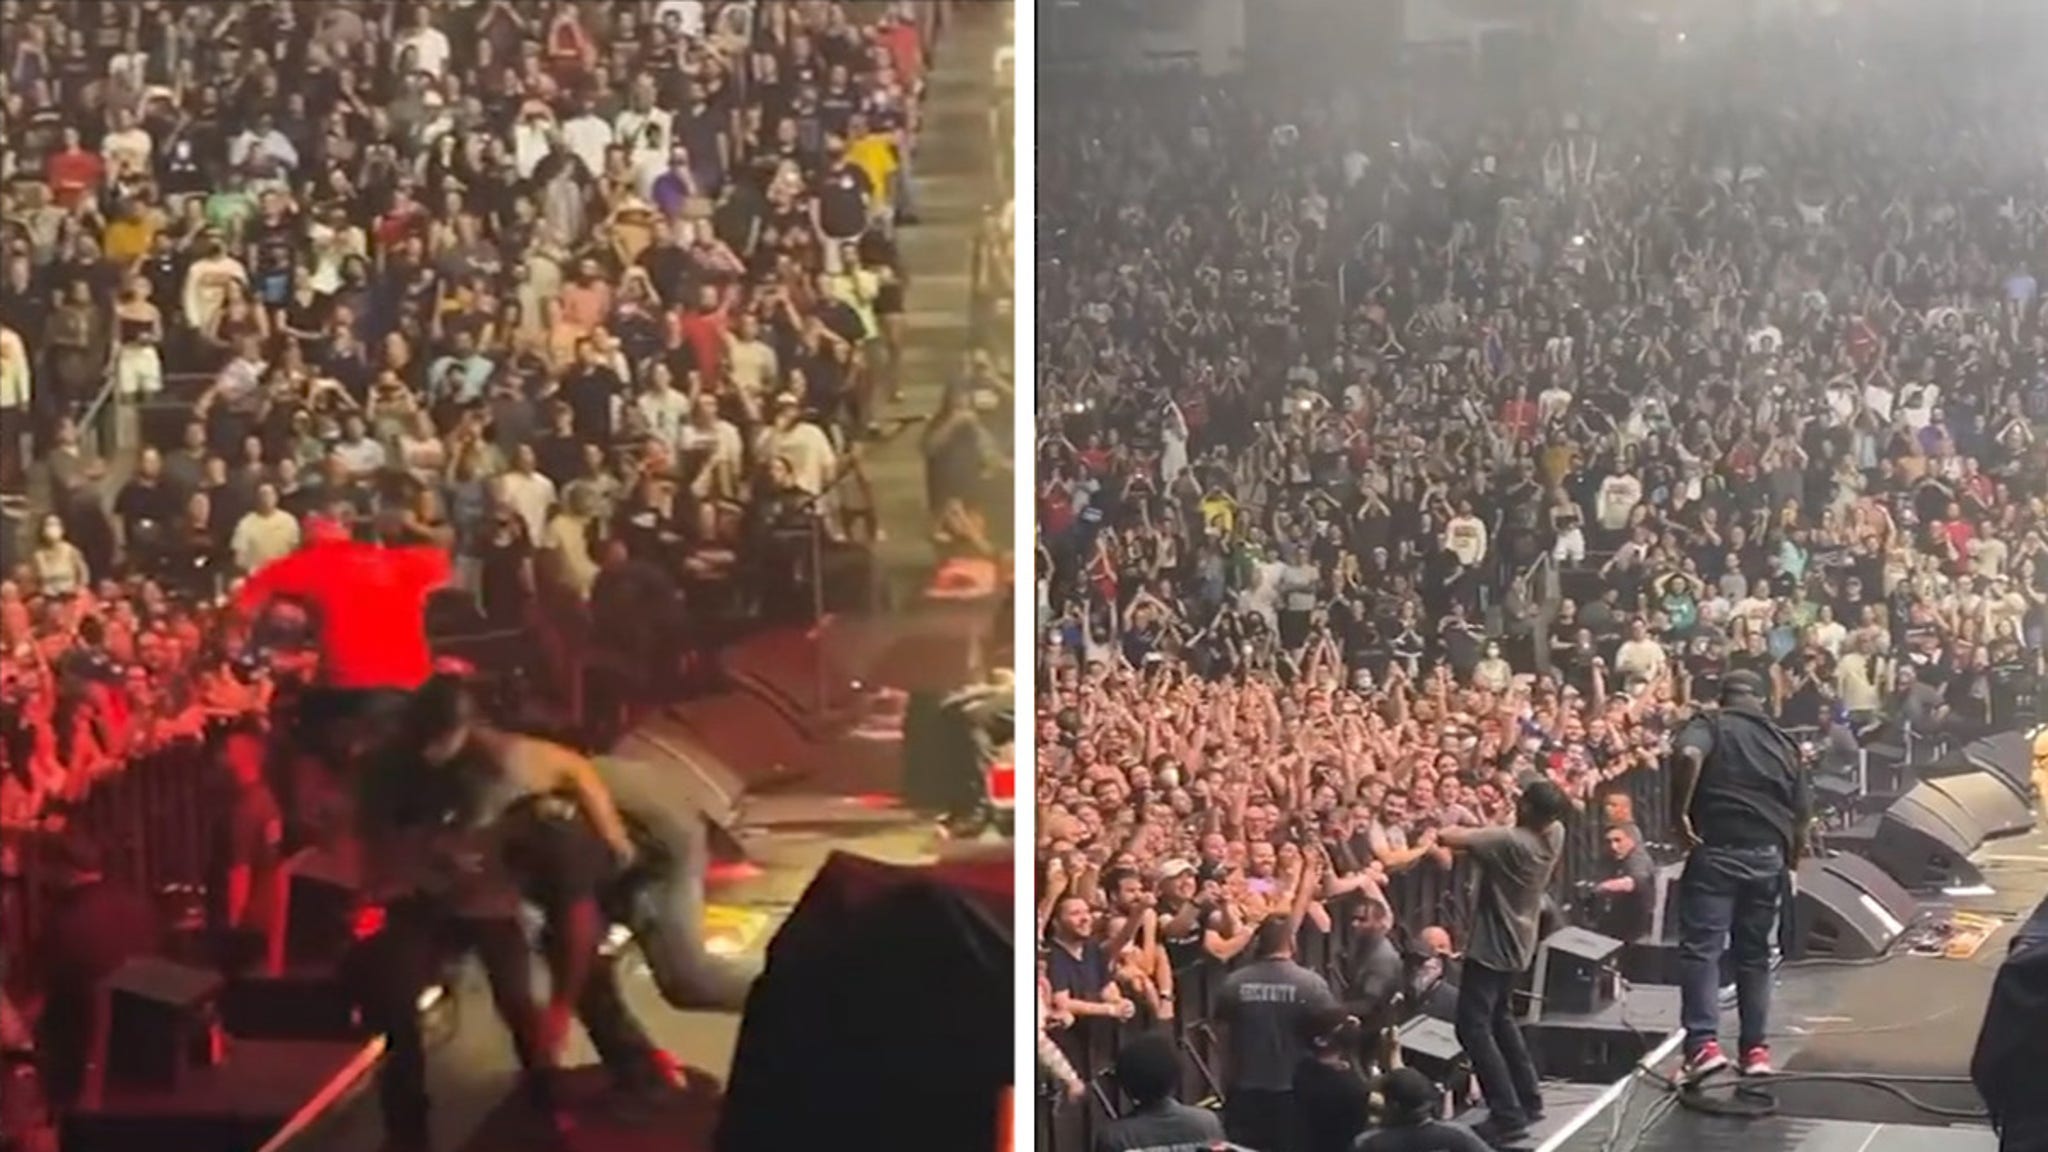 Tom Morello of Rage Against The Machine tackled during a concert in Toronto